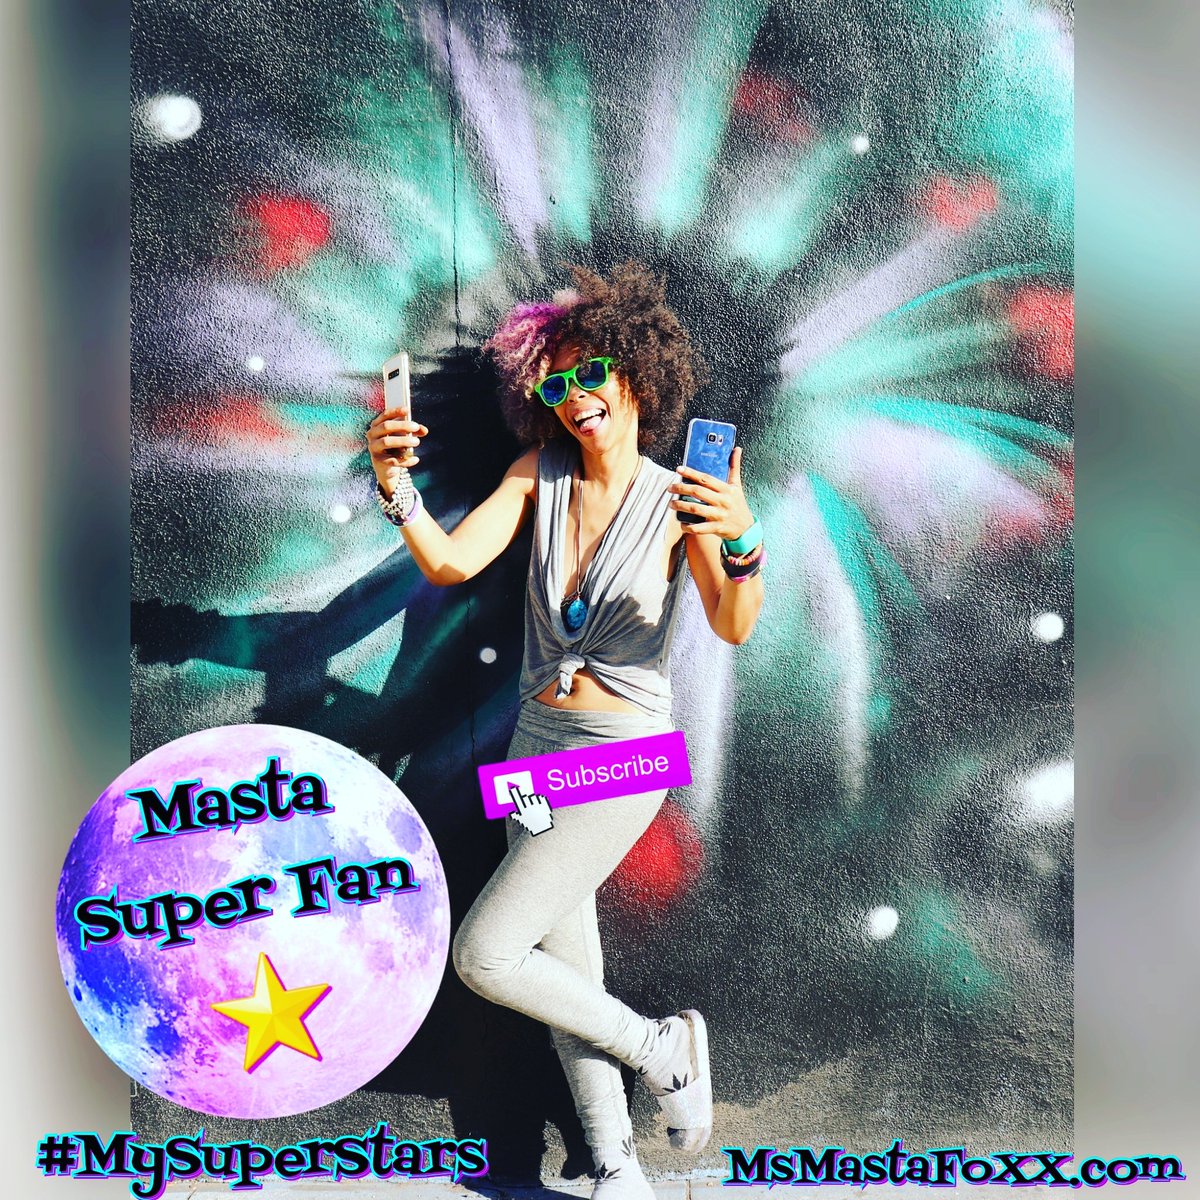 Welcome To The New Page Dedicated To @MsMastaFoXX's Top Super Star #Fans! Become A #MastaSuperFan Aka #MySuperStars #YourHealthyAddiction ⭐💜👽🦊🔥 A Fan That Reps & Supports #Creator|#Broadcaster|#Influencer #MsMastaFoXX & Is Apart Of @TeamMsMastaFoXX, @CosmicFam & @UFlyOSquad